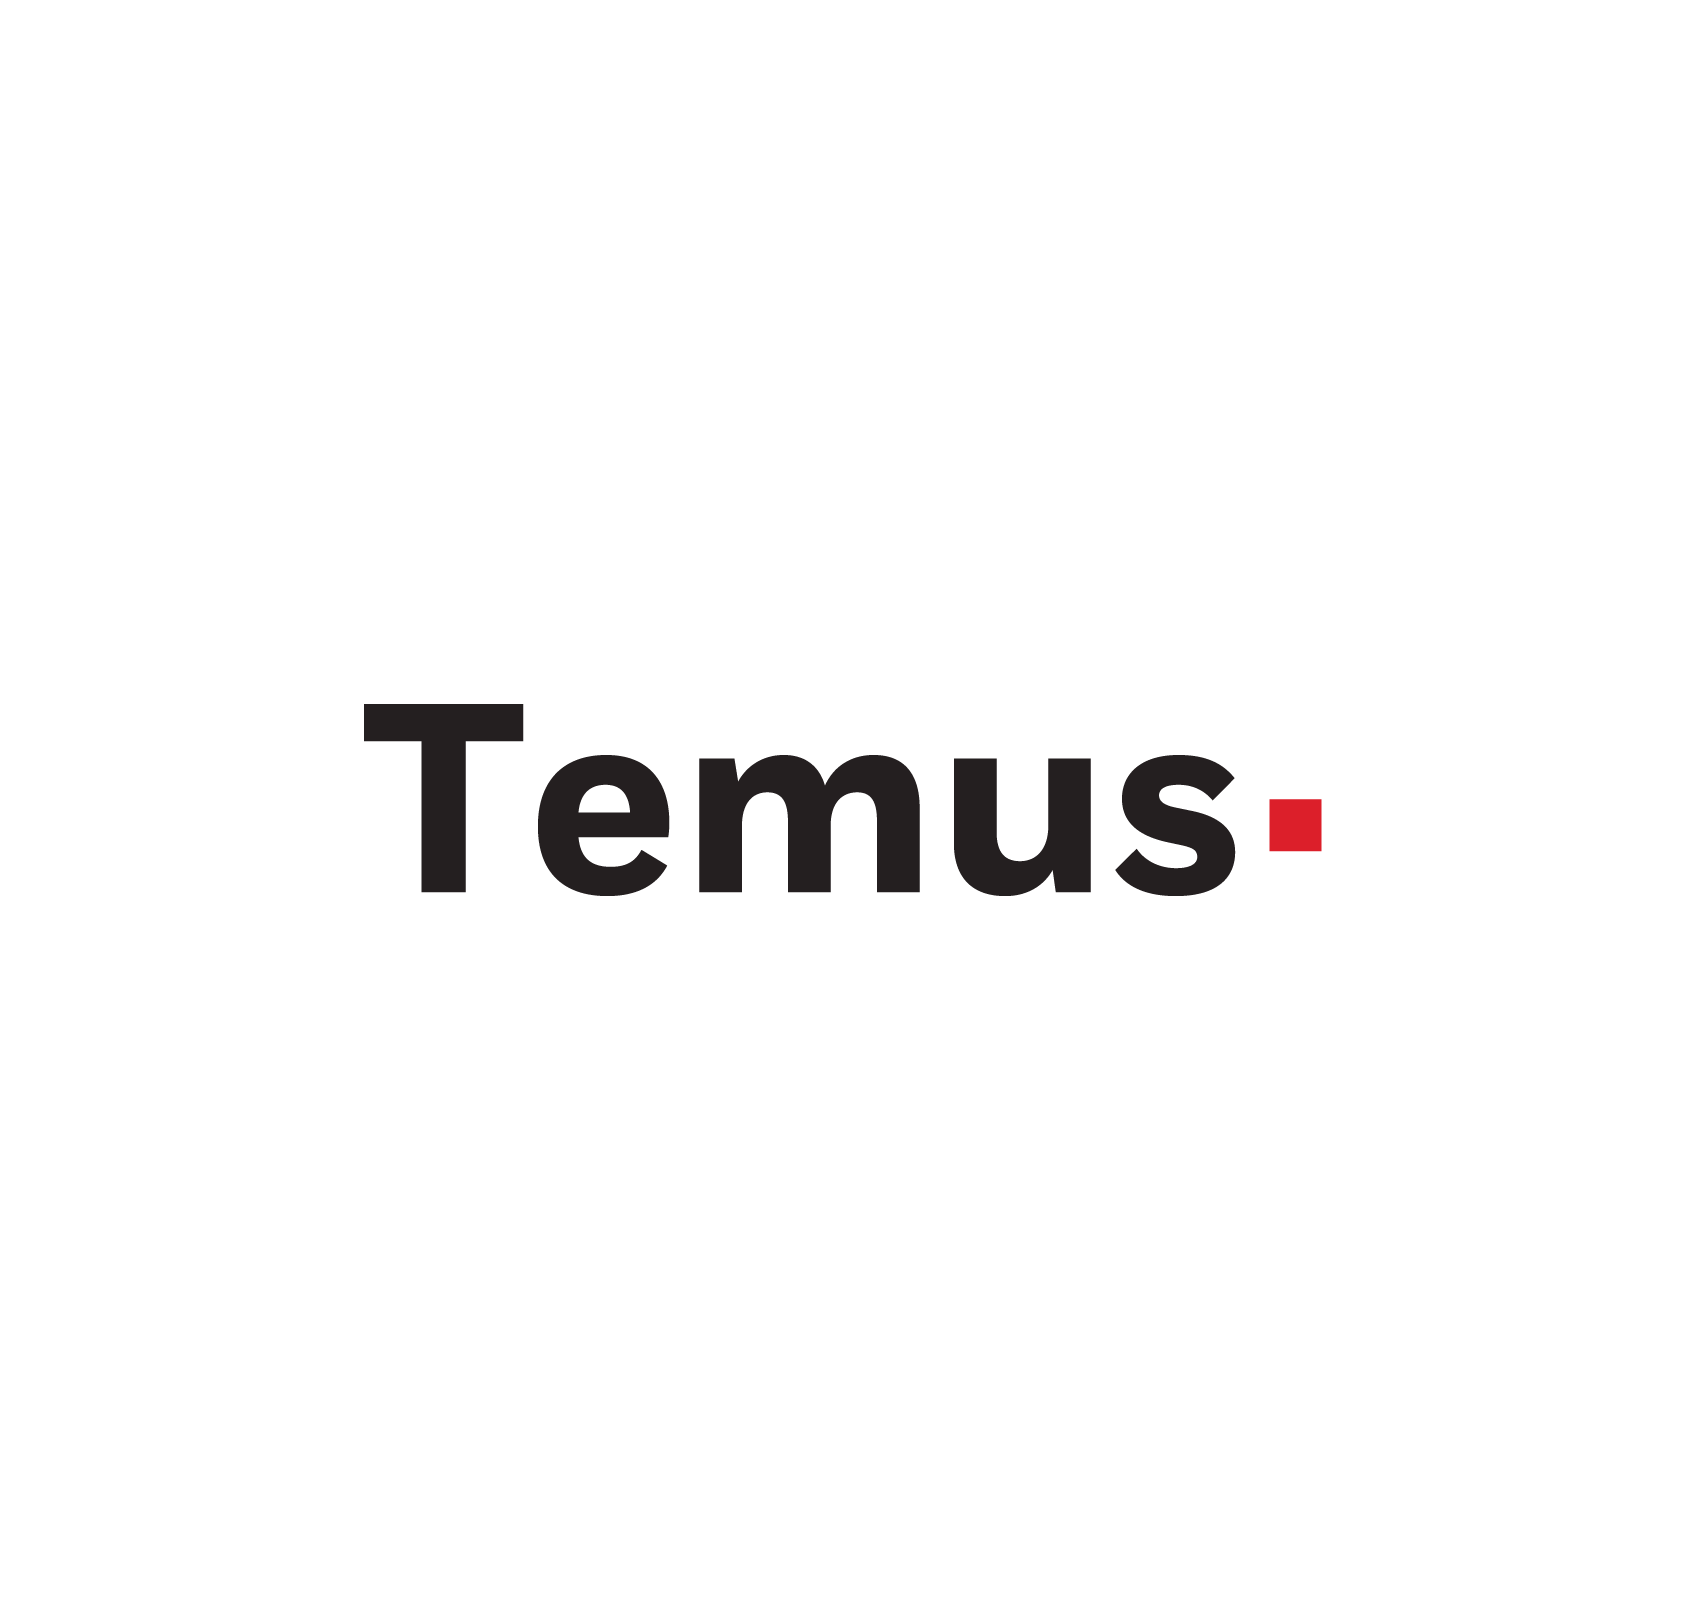 Temus to support and accelerate digital transformation in Singapore and beyond